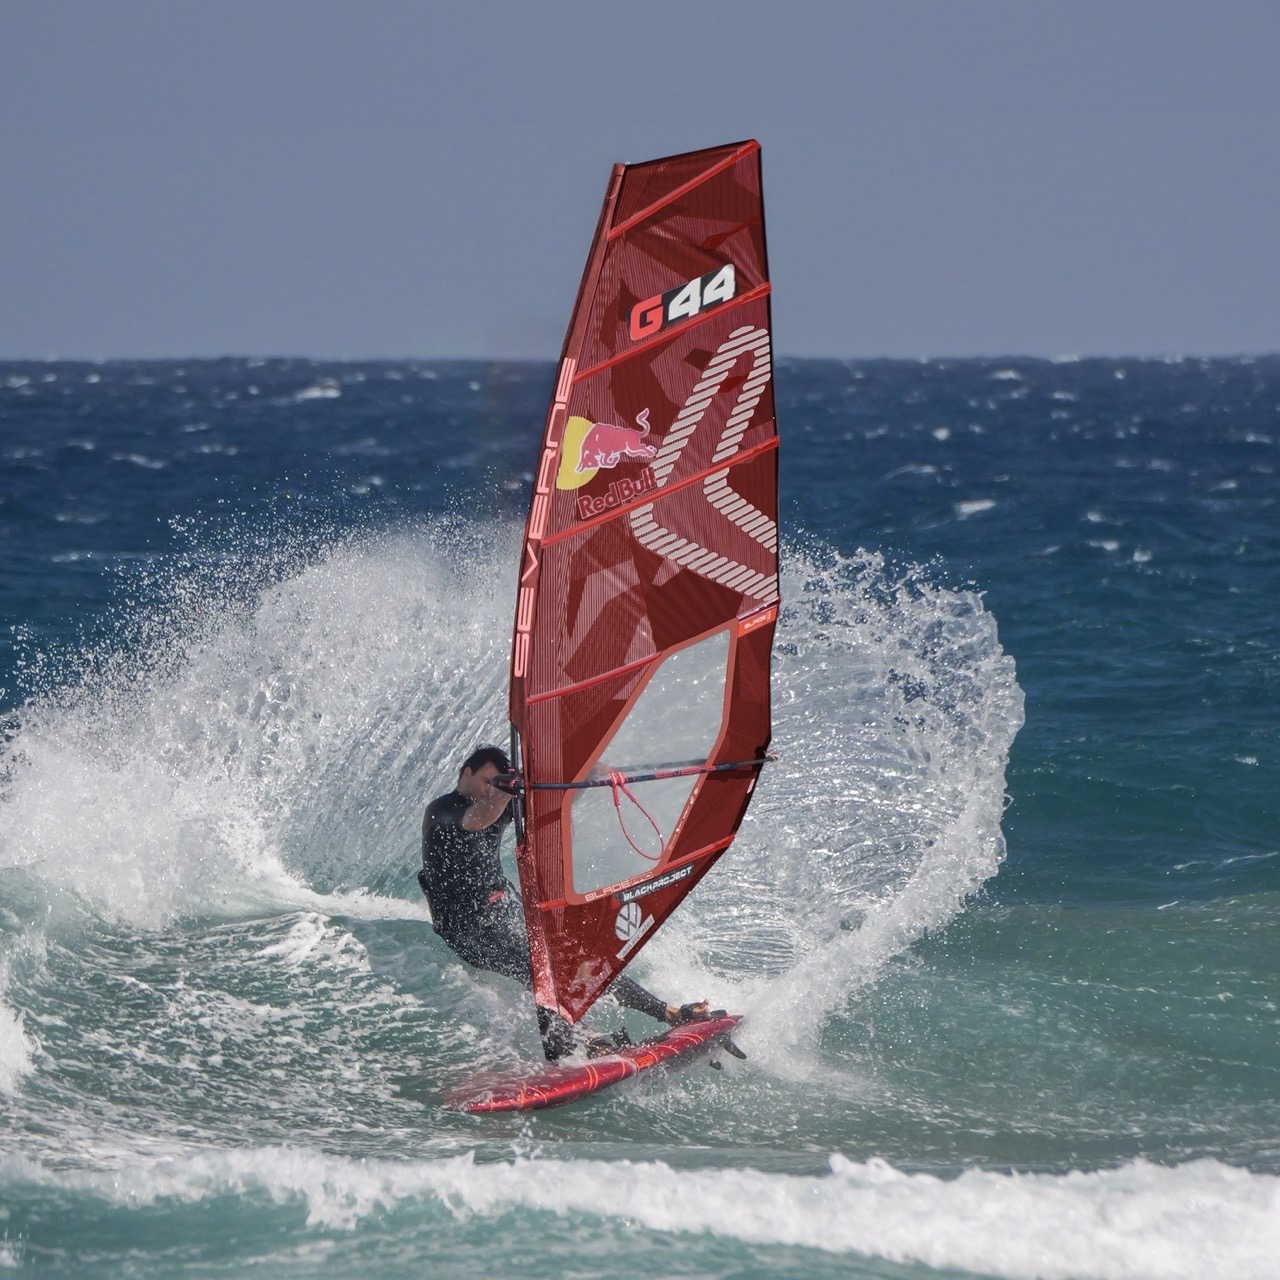 Philip Köster showing why twin fin can be the best windsurf wave fin setup